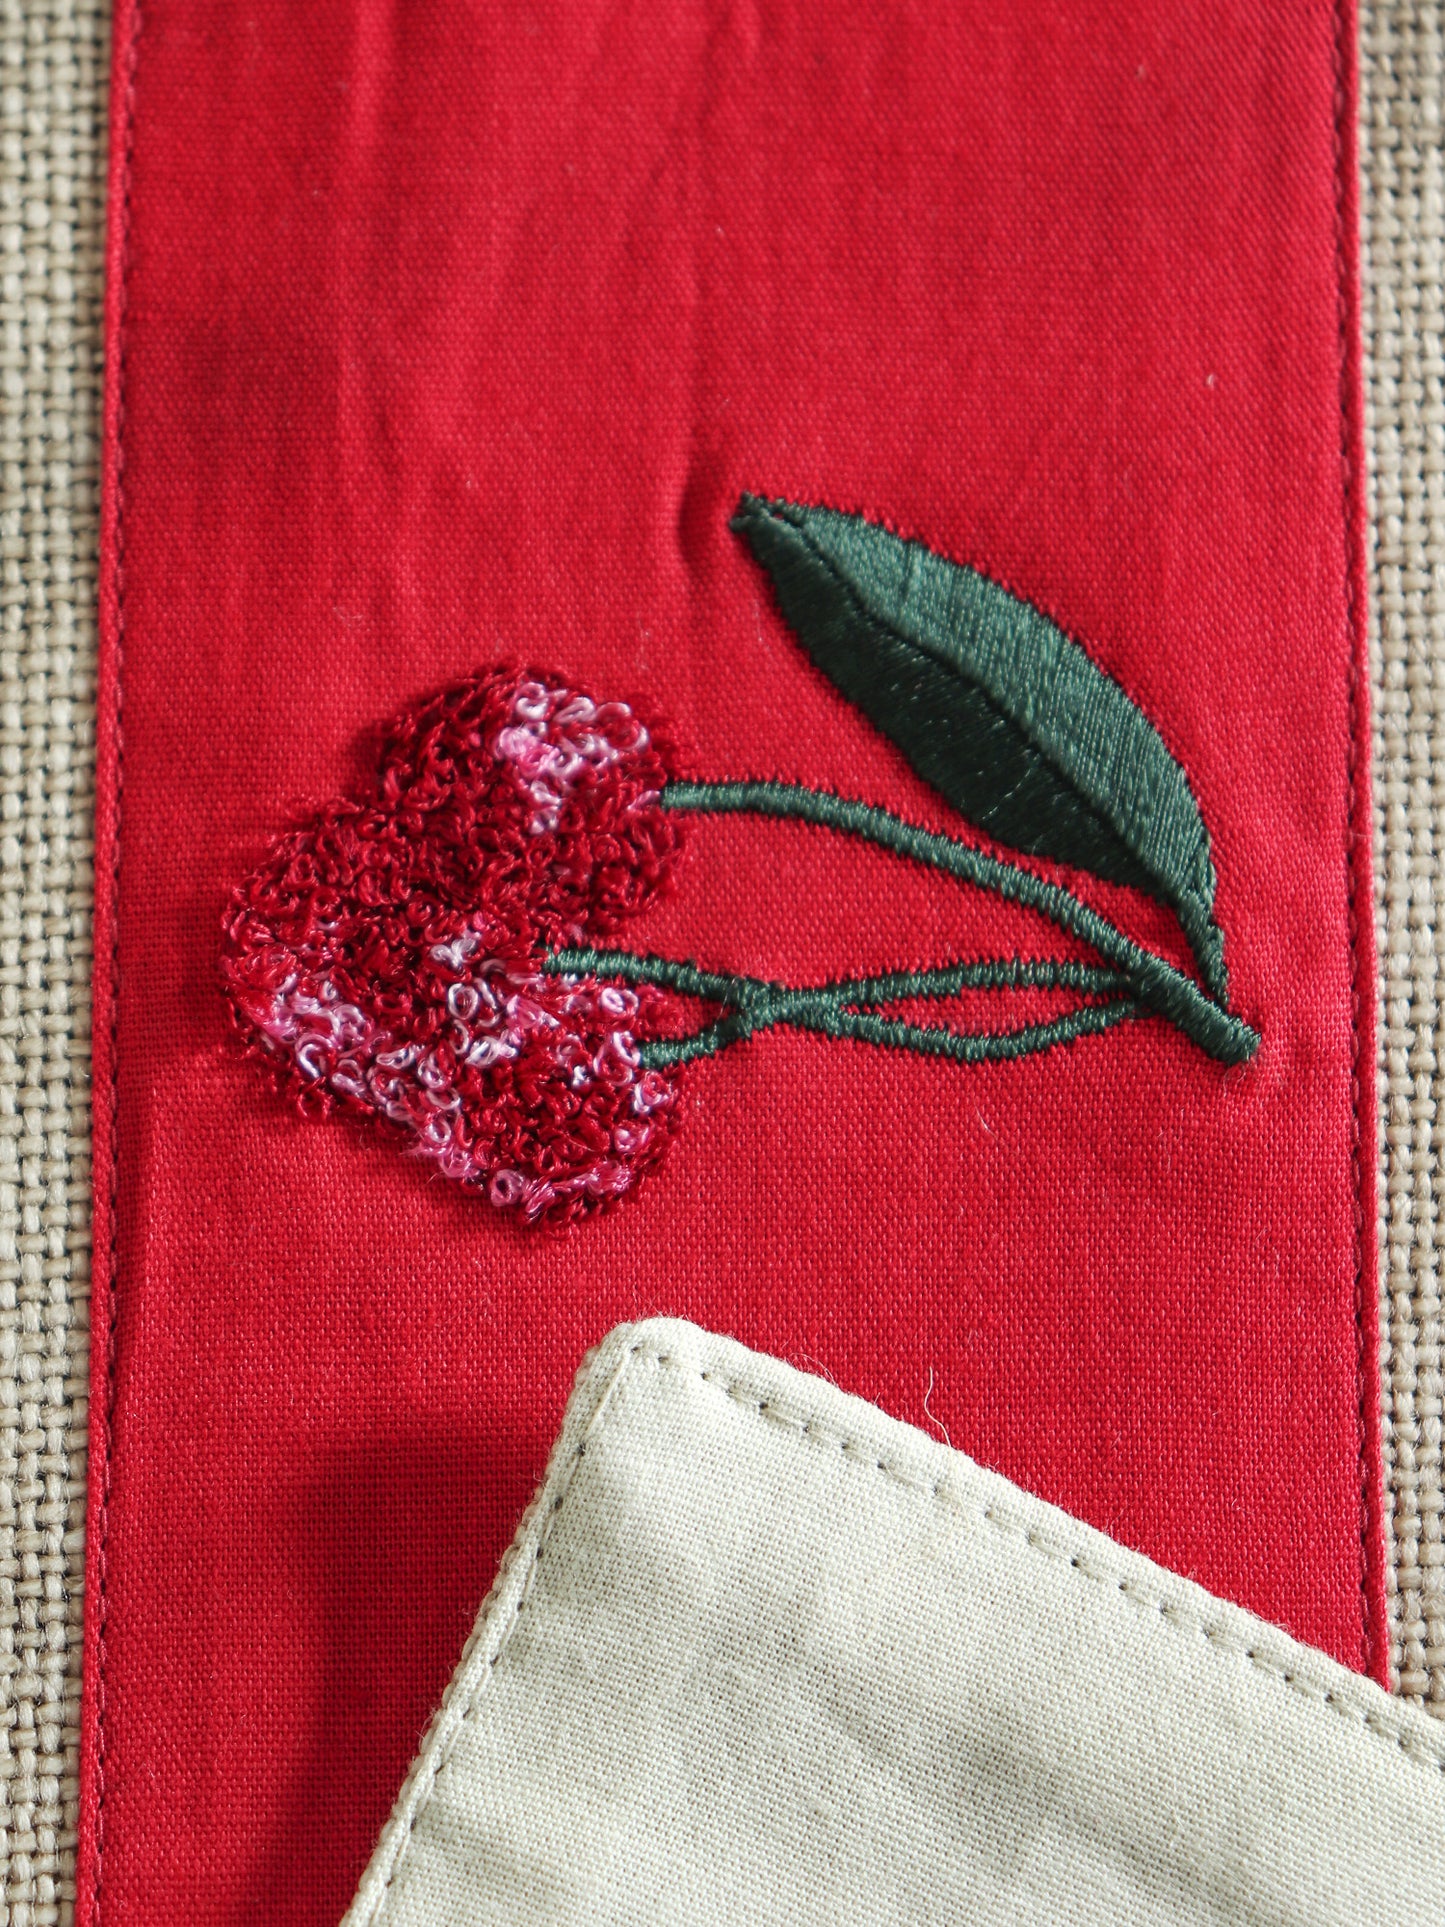 closeup of red floral embroidery in center patch on beige table runner for 6 seater dining table -  12x84 inches